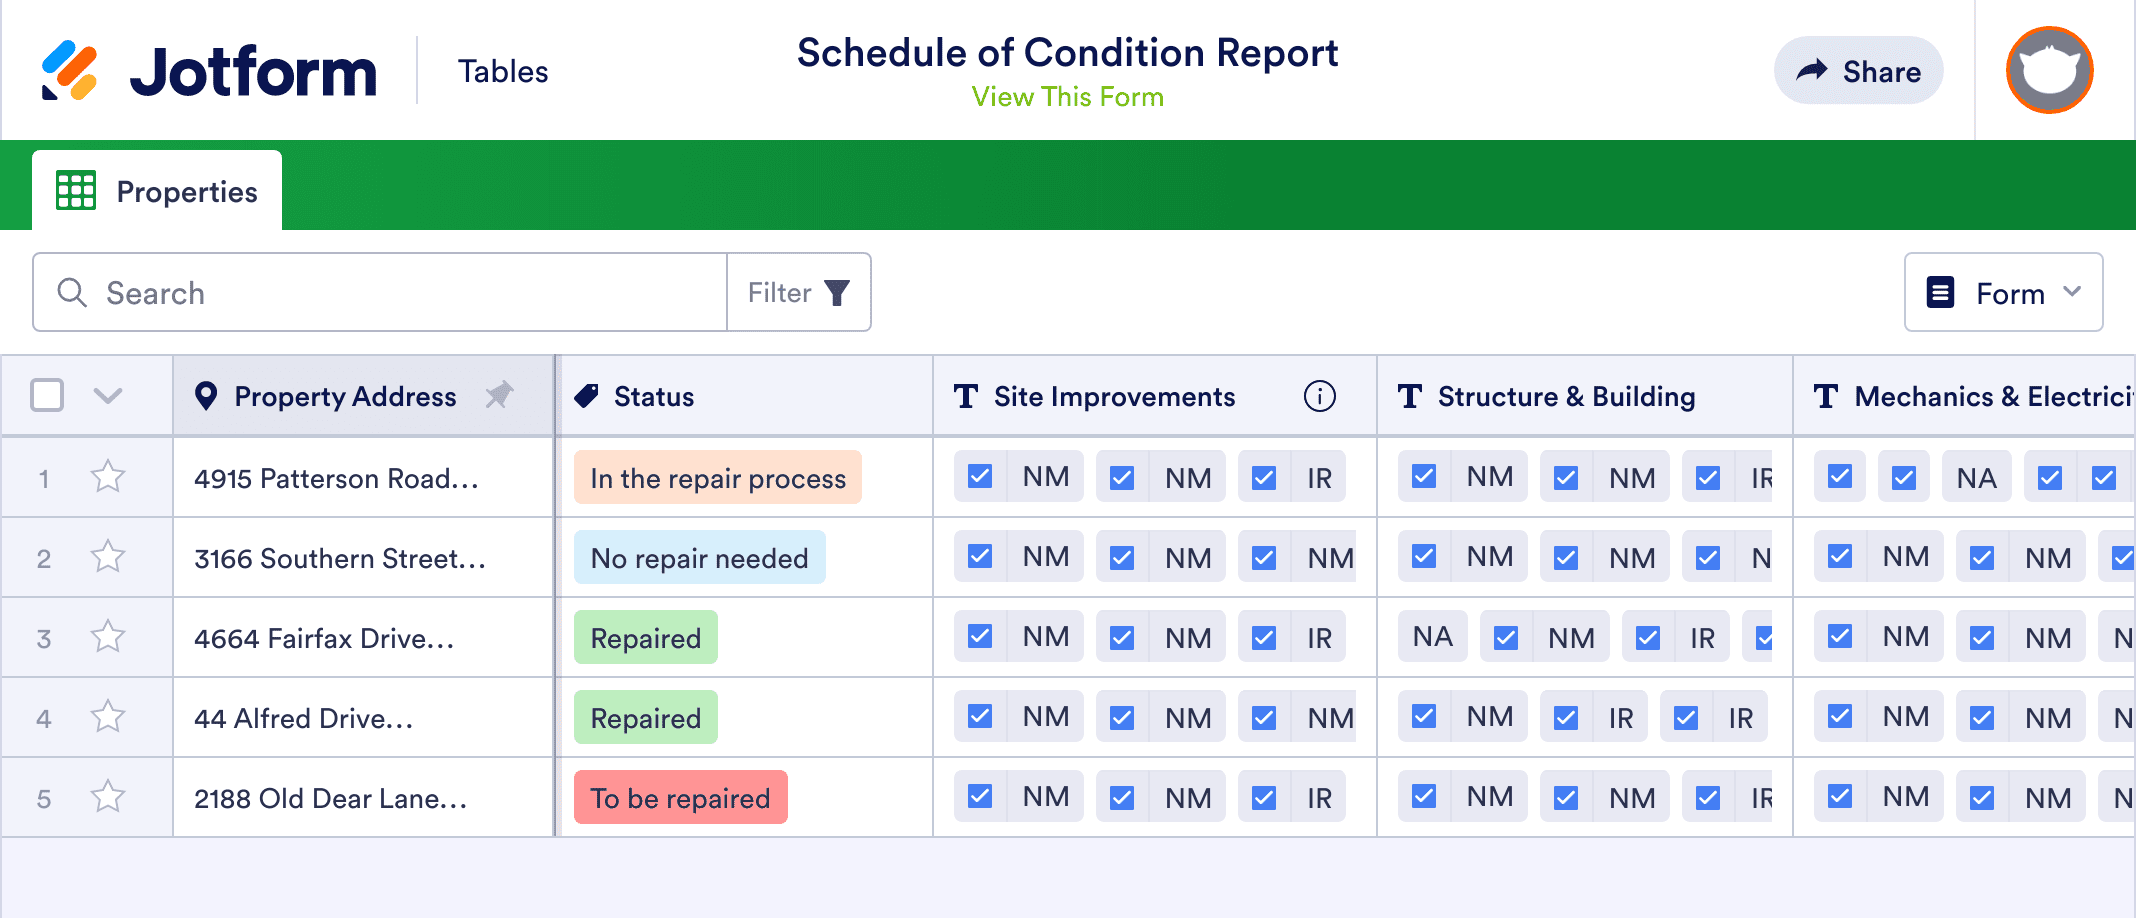 Schedule of Condition Report